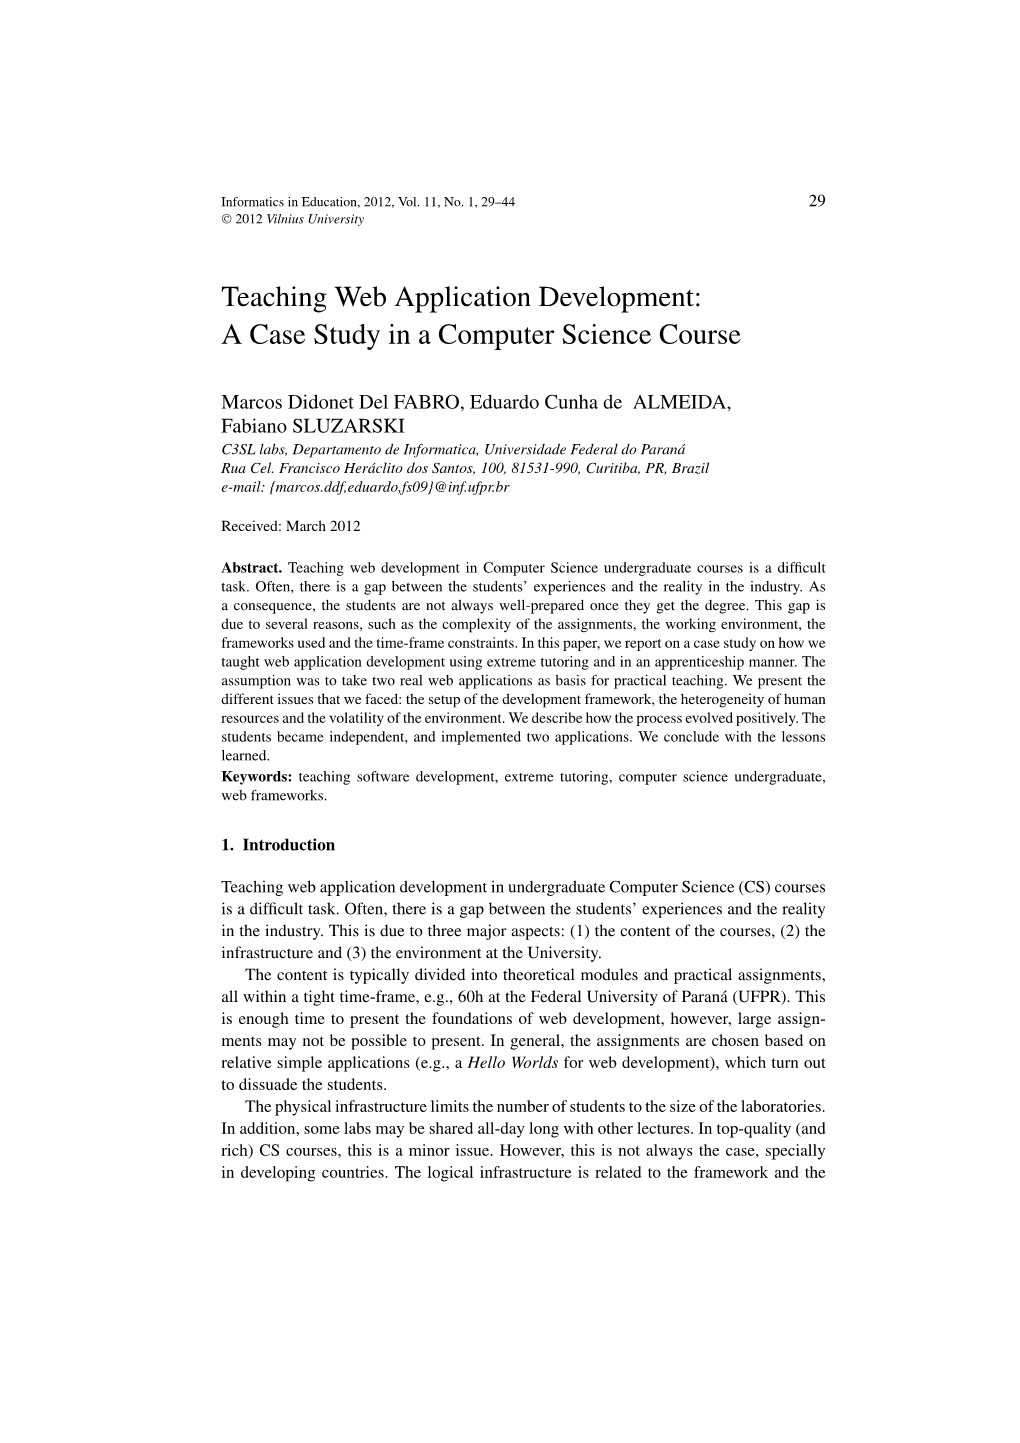 Teaching Web Application Development: a Case Study in a Computer Science Course